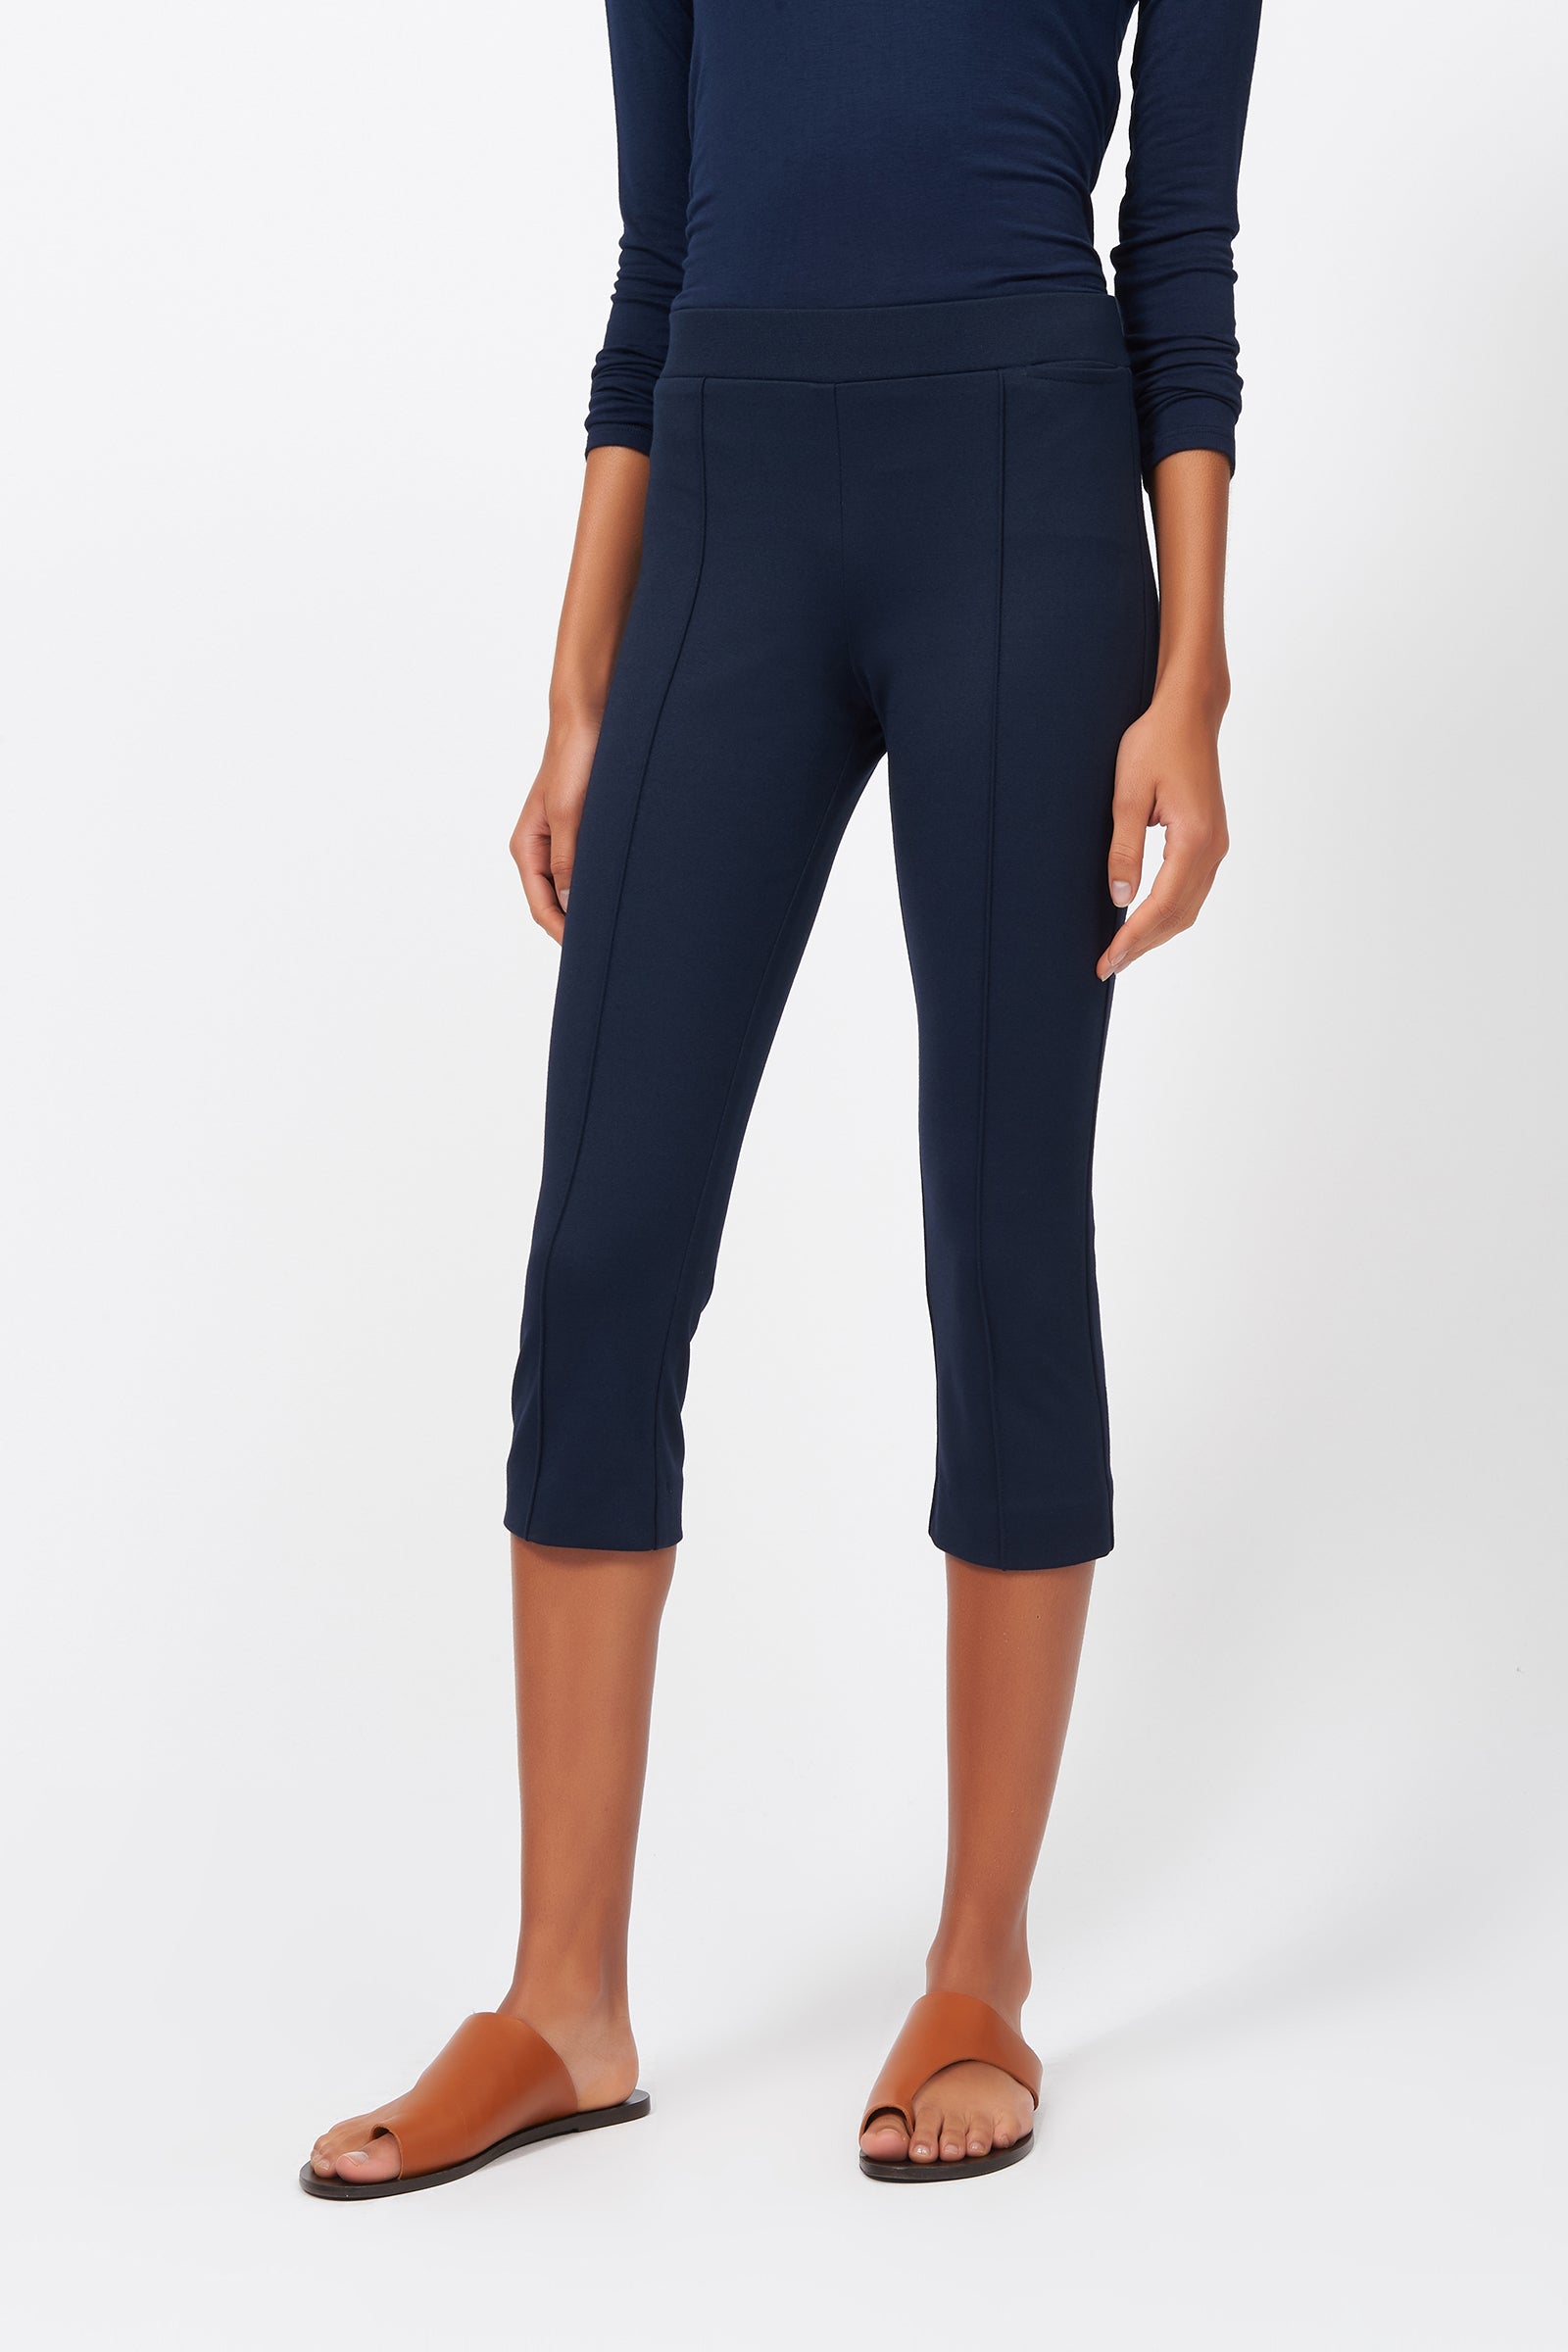 Kal Rieman Pintuck Ponte 3/4 Pant in Navy on Model Front View